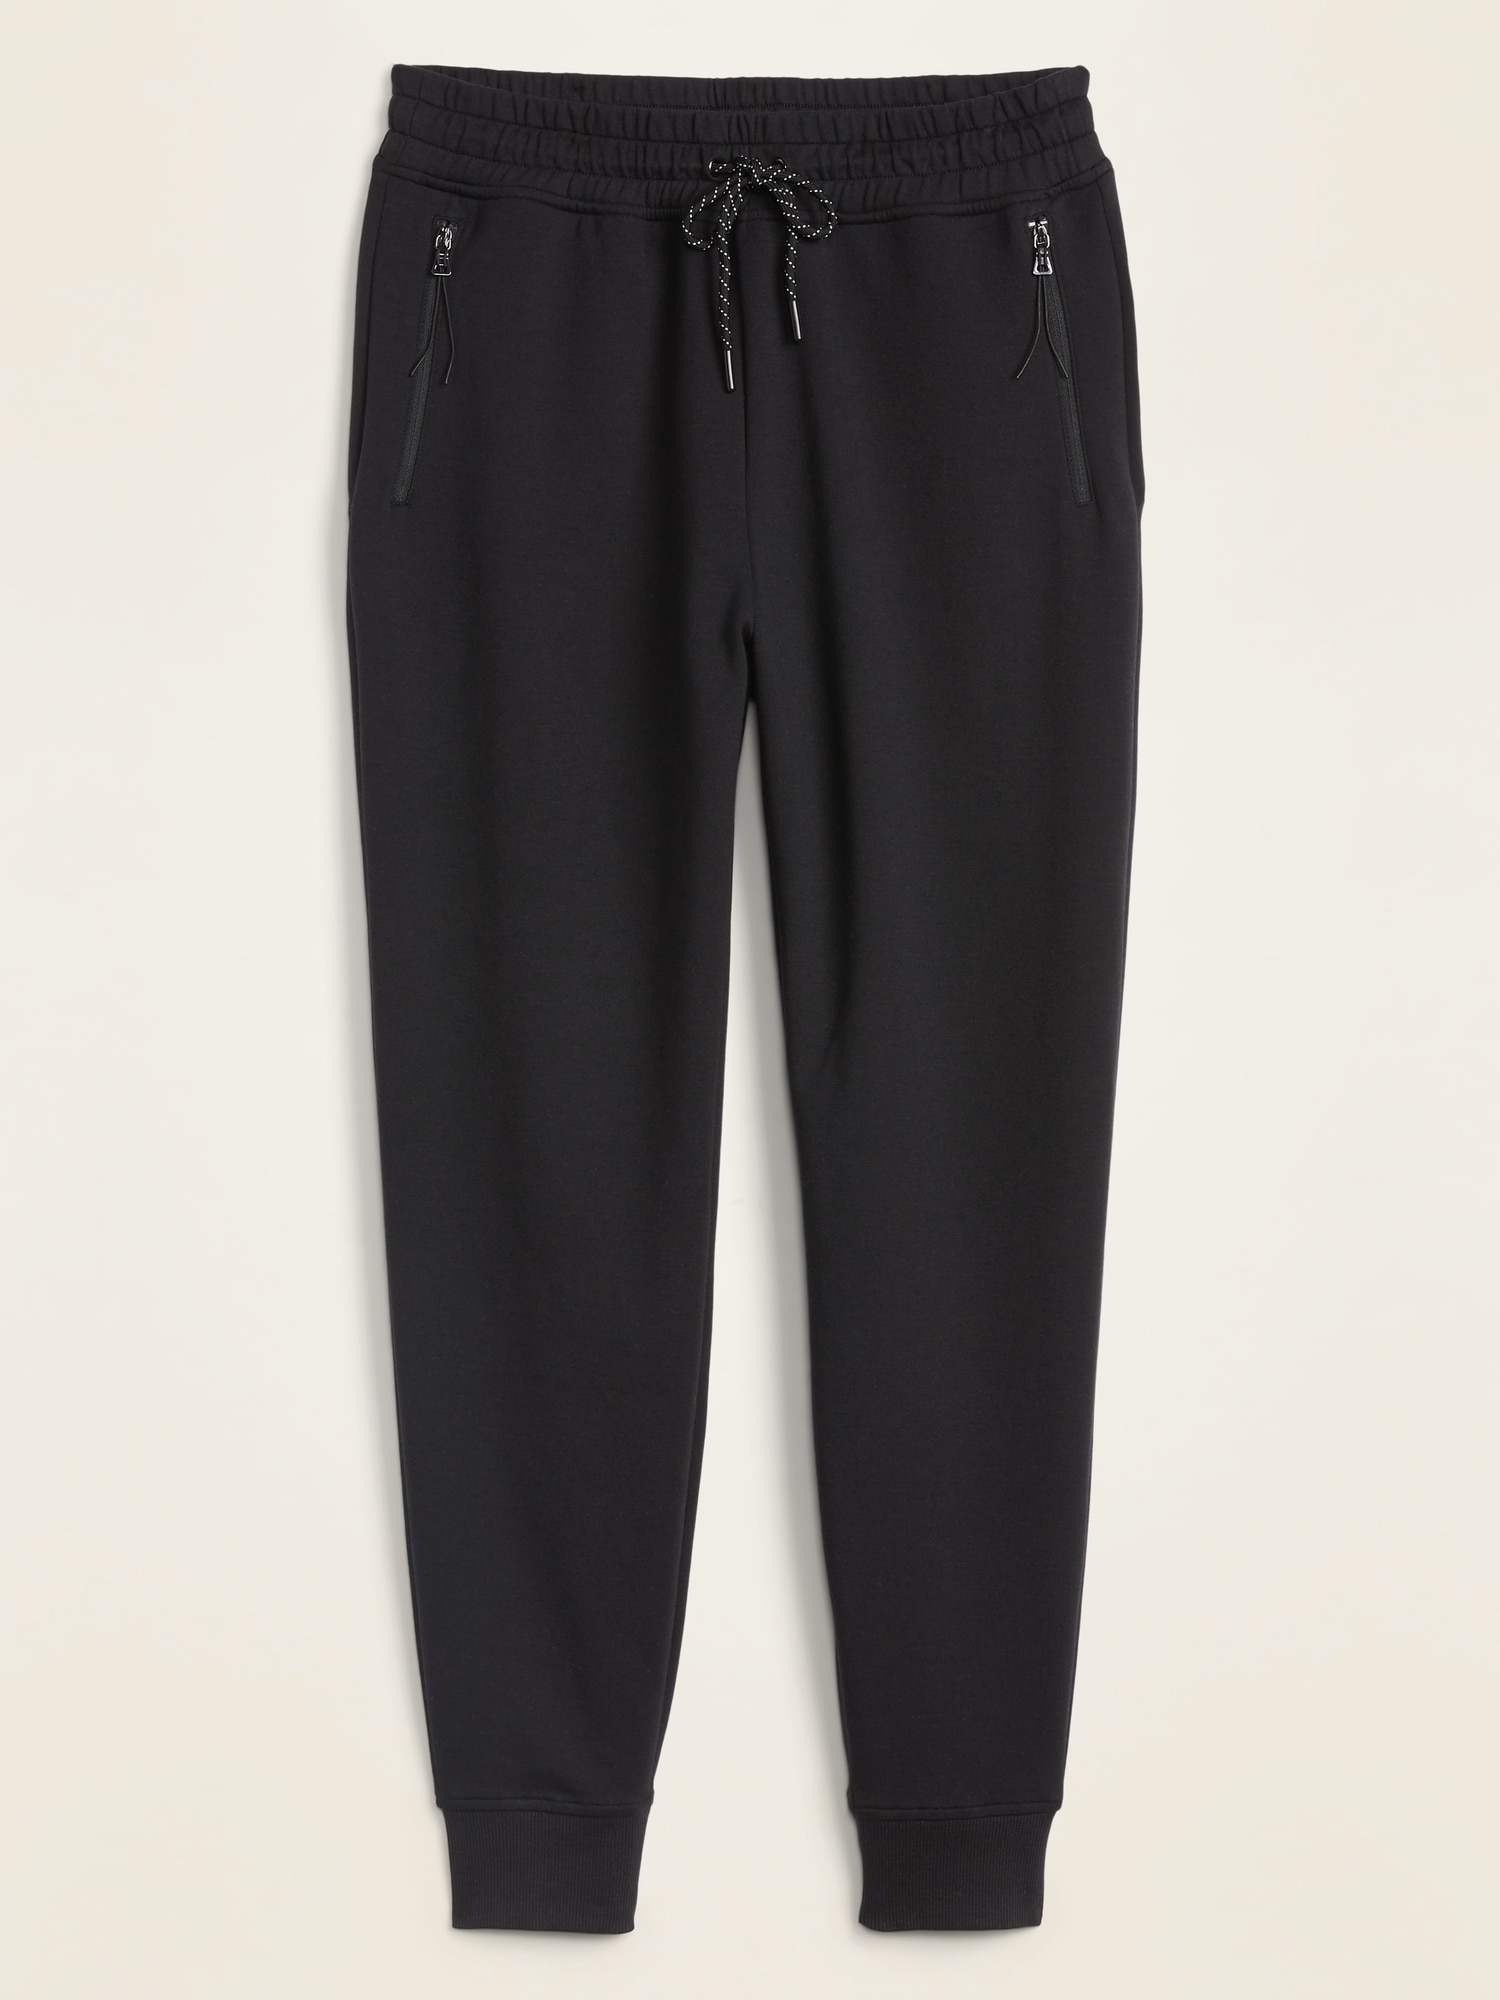 High-Waisted Dynamic Fleece Jogger Pants for Women | Old Navy